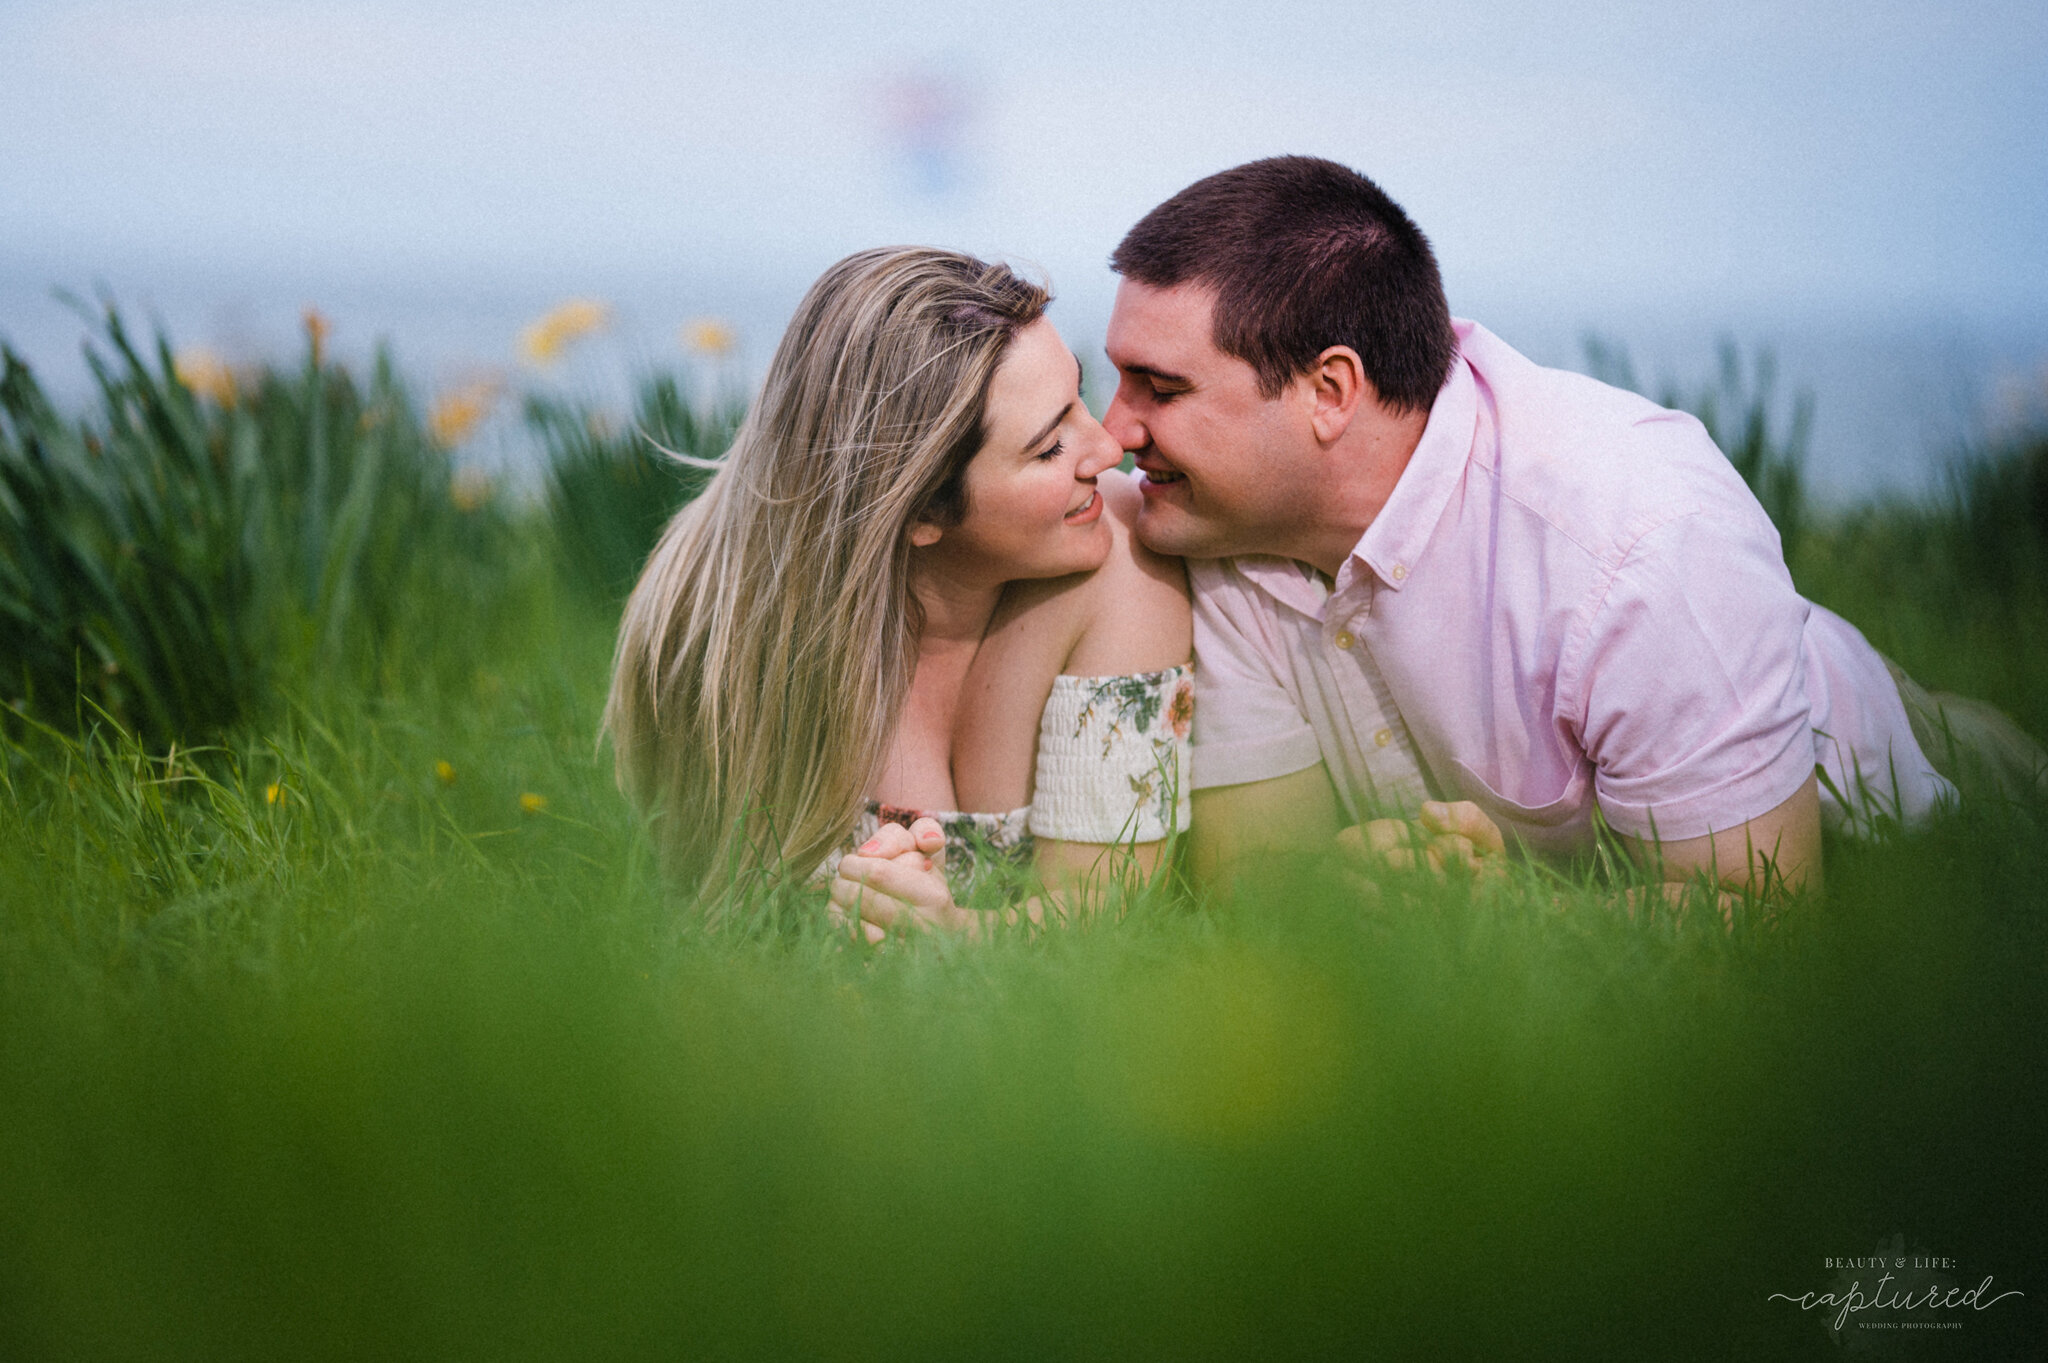 Beauty_and_Life_Captured_Taylor_and_Drew_Engagement-130.jpg